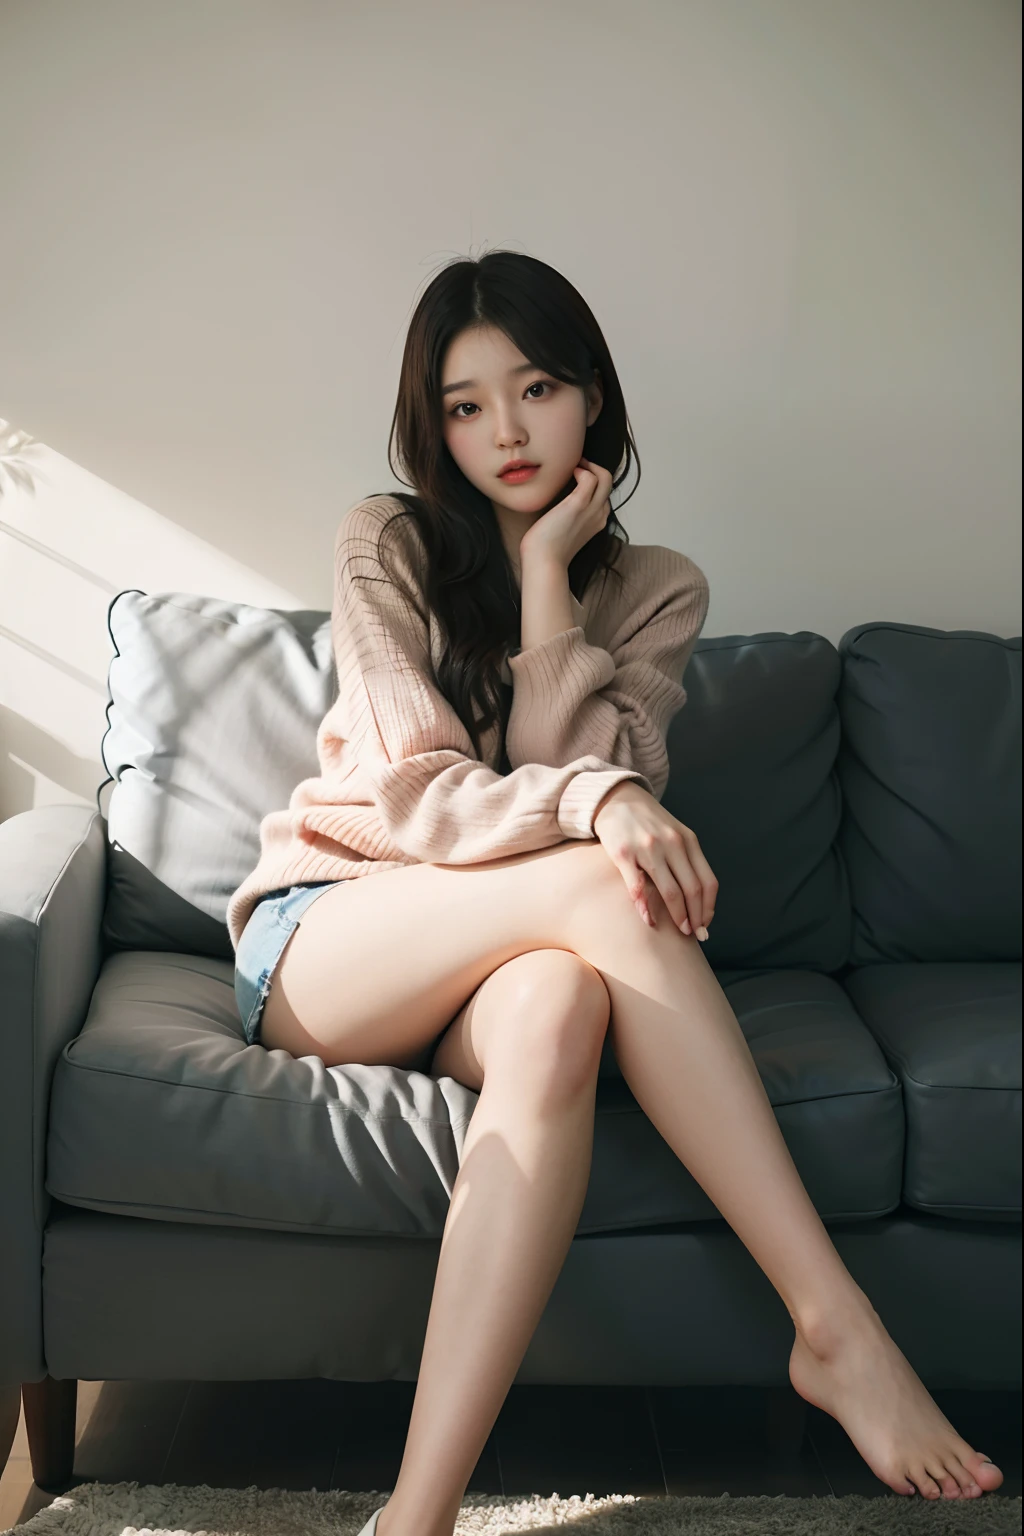 arafed woman sitting on a couch with her legs crossed, gorgeous young korean woman, beautiful young korean woman, korean girl, korean women's fashion model, beautiful south korean woman, korean woman, attractive girl, sitting on couch, attractive pose, beautiful asian woman sitting, cute young woman, casual pose, beautiful asian girl, young asian girl, lovely woman, asian girl